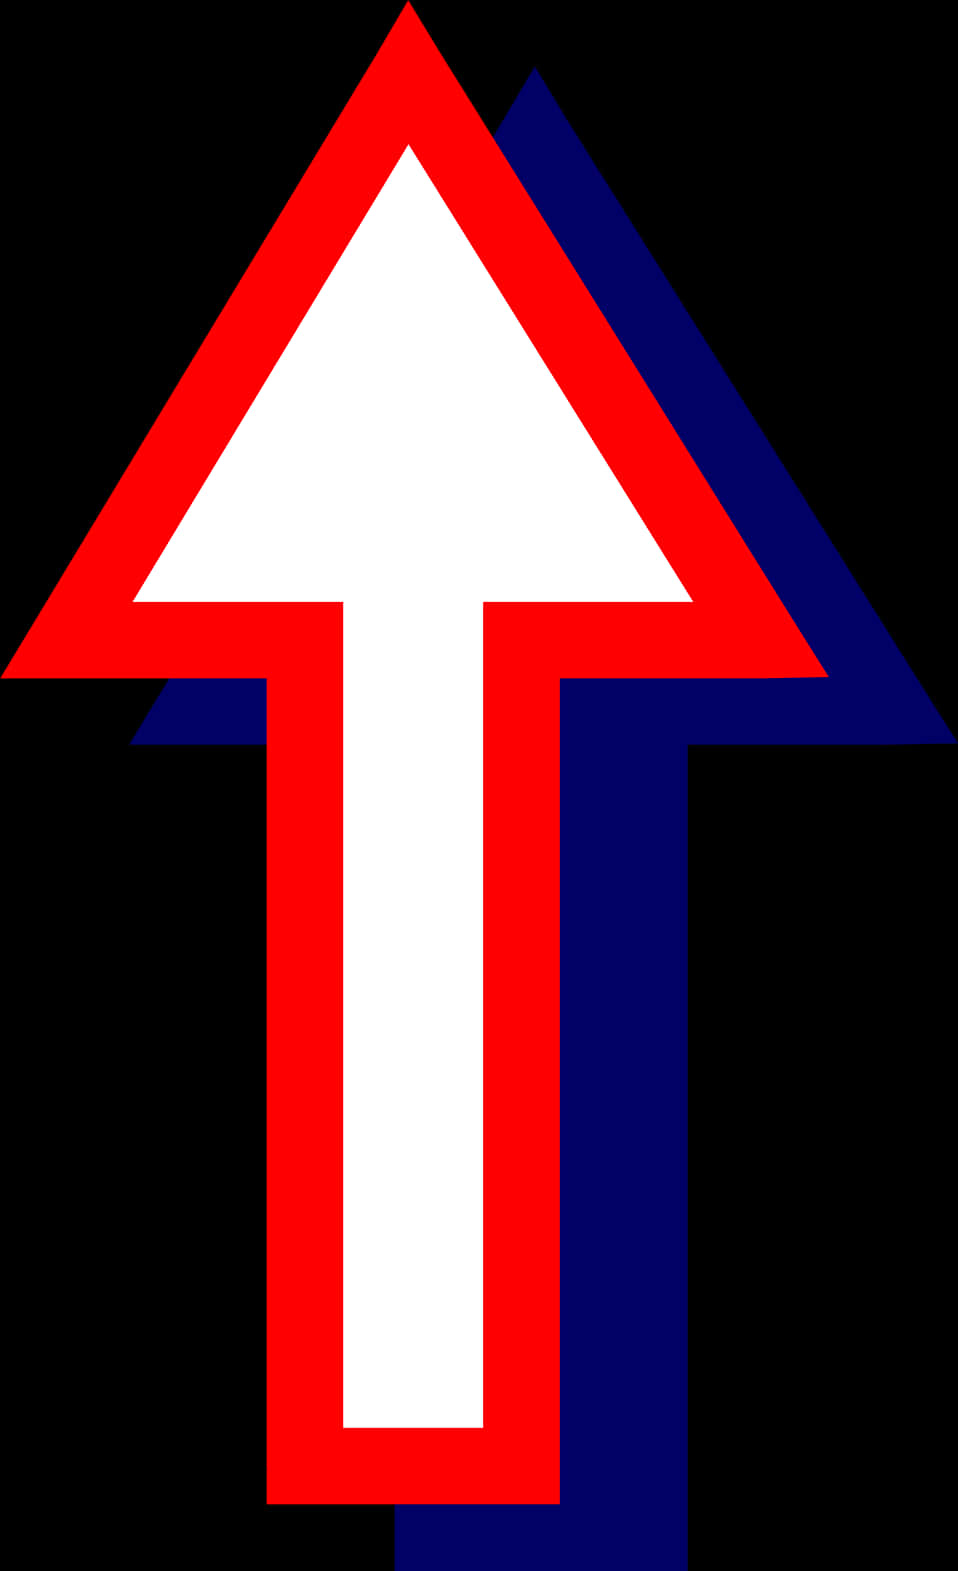 Redand Blue Arrows Graphic PNG image